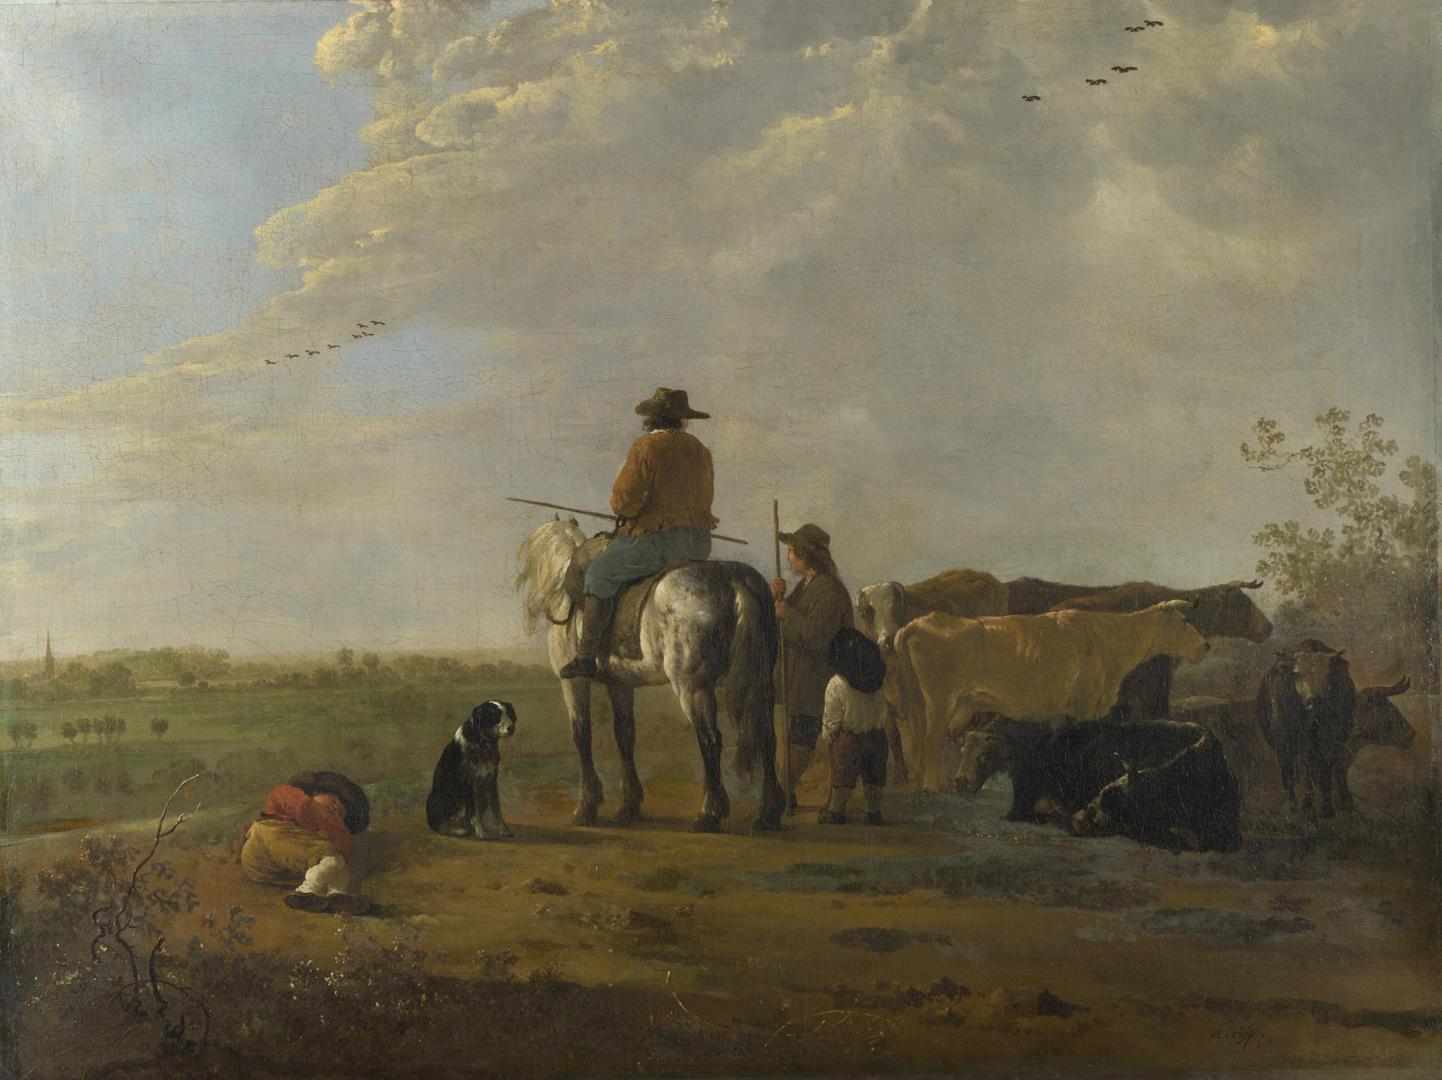 A Landscape with Horseman, Herders and Cattle by Aelbert Cuyp